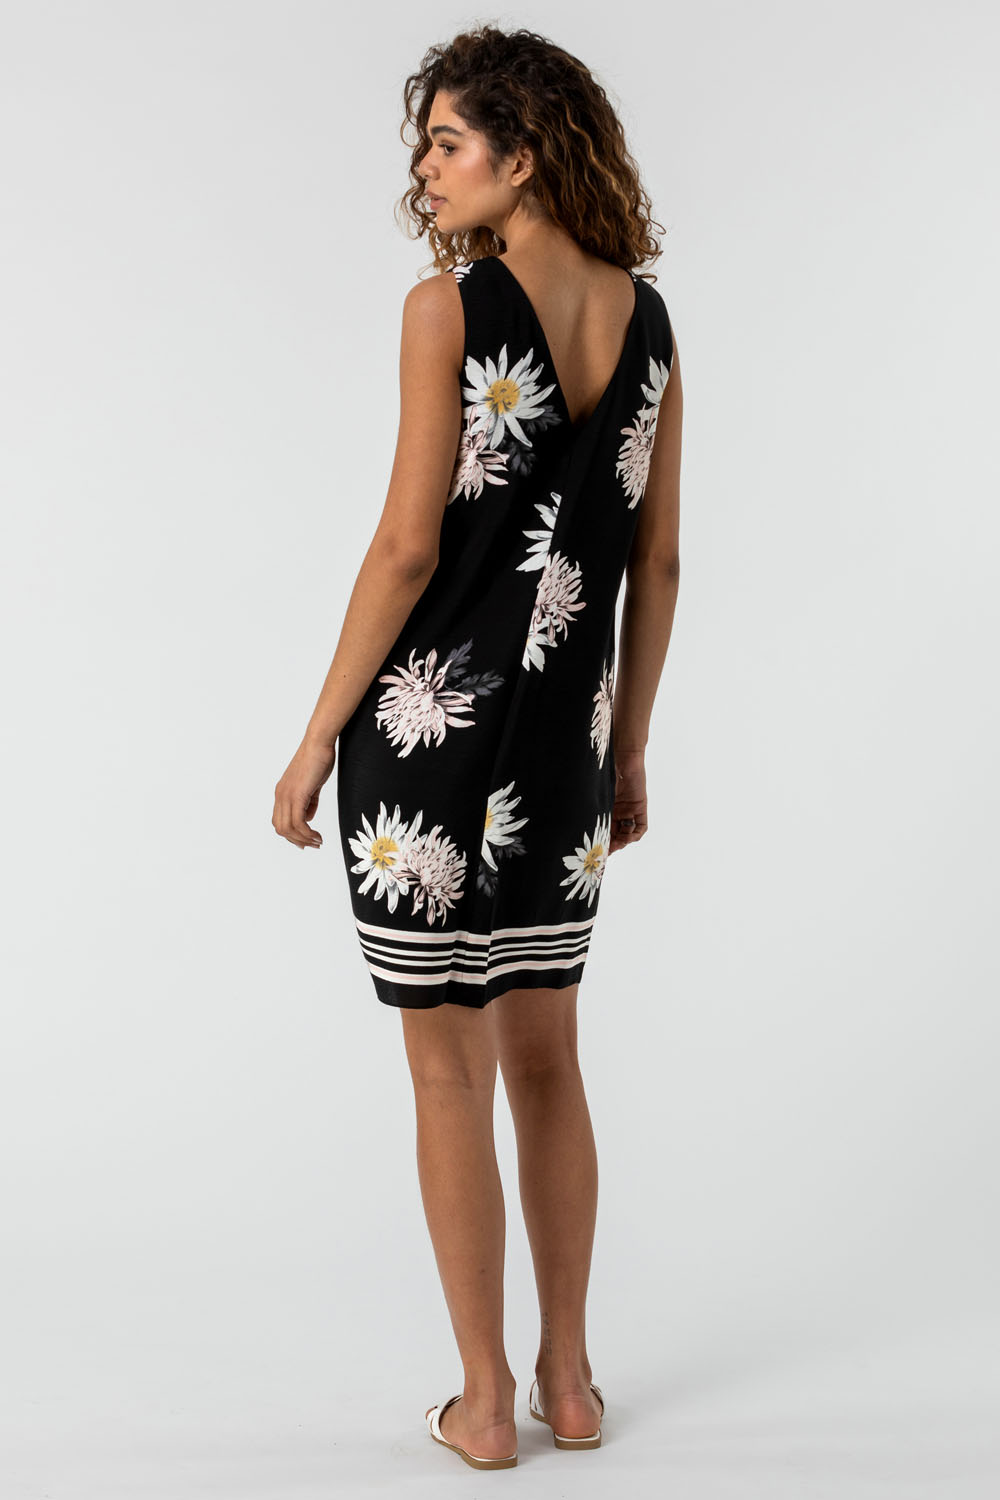 Black Daisy Floral Shift Dress, Image 3 of 5